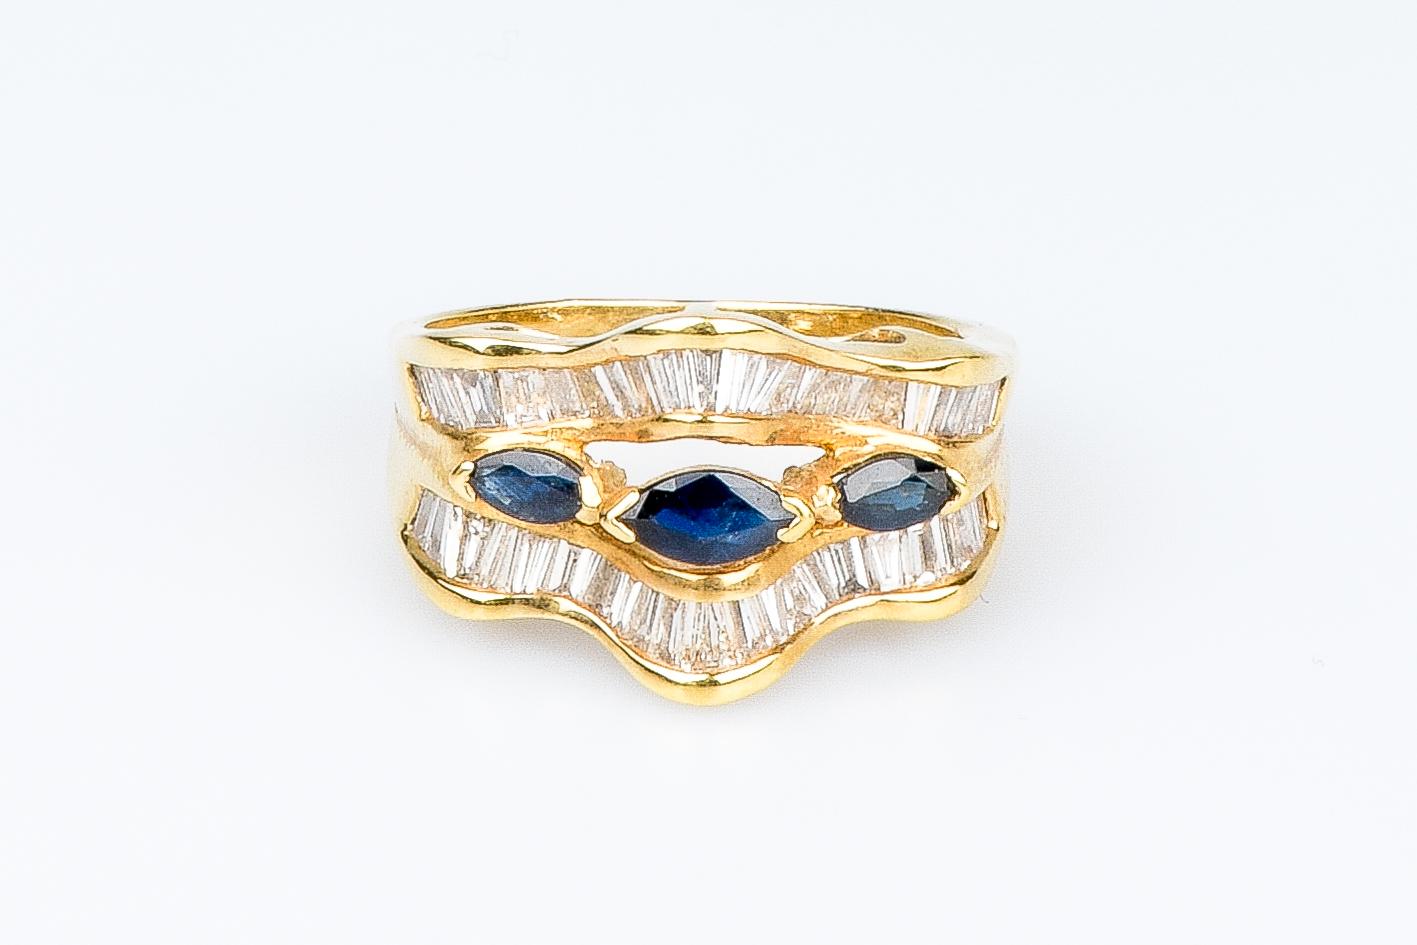 18 carat yellow gold ring designed with 1 shuttle sapphire weighing 0.24 carat, 2 shuttle sapphires weighing 0.26 carat and 48 round baguette cut diamonds weighing 1.44 carat.

Quality of the diamond:
Color : H
Clarity : SI

 Weight : 6.40 gr.